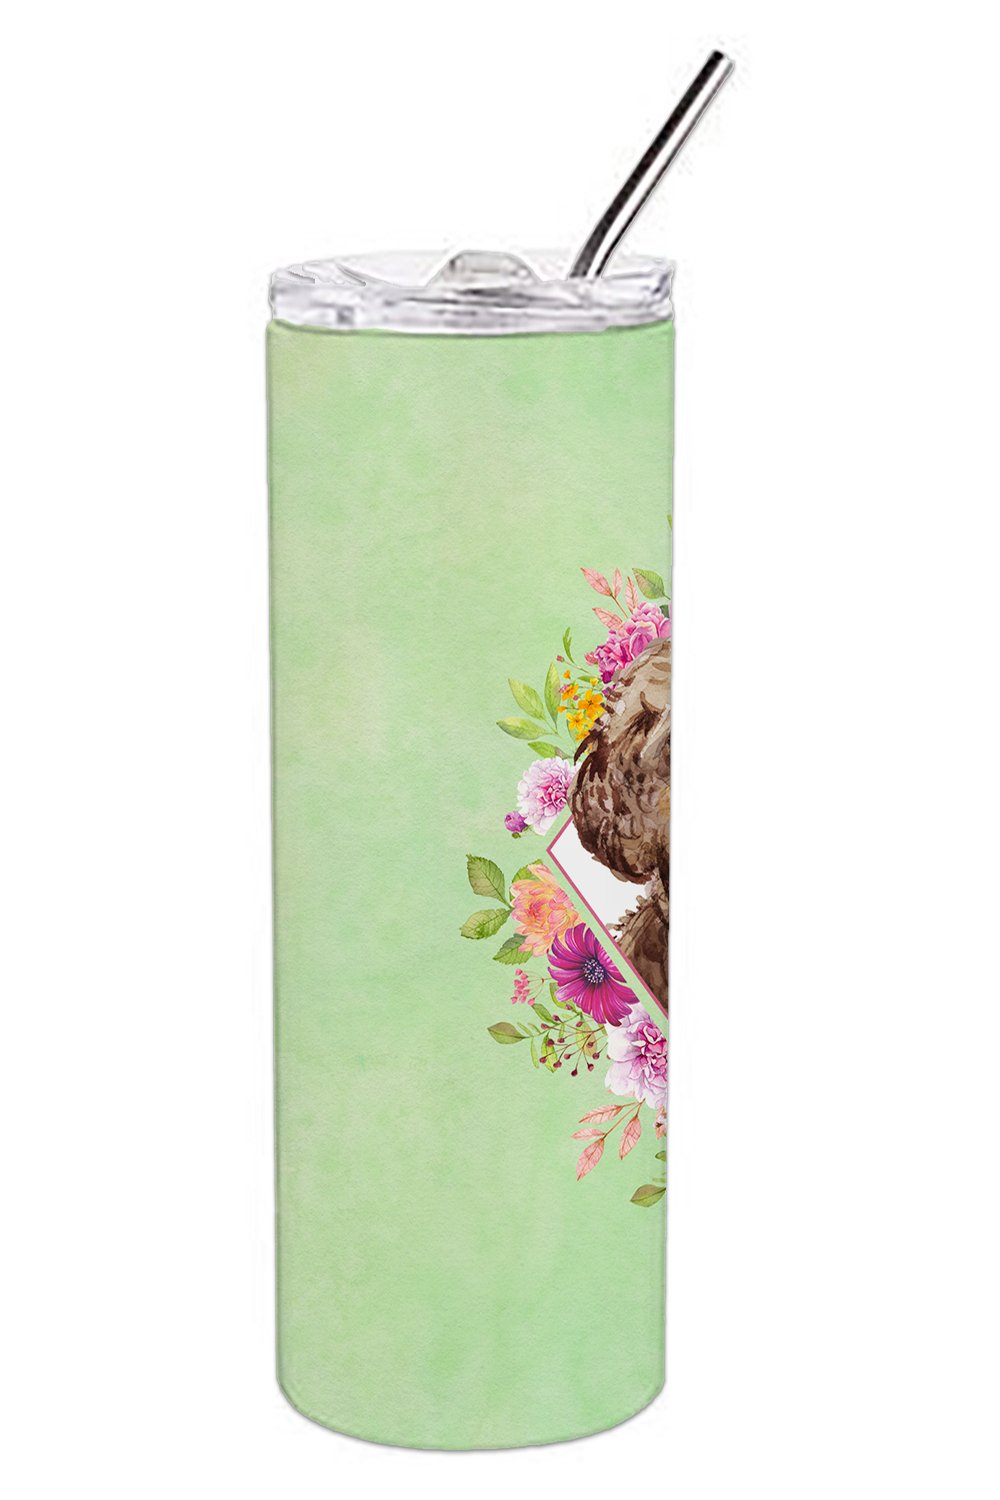 Chocolate Cockapoo Green Flowers Double Walled Stainless Steel 20 oz Skinny Tumbler CK4413TBL20 by Caroline's Treasures